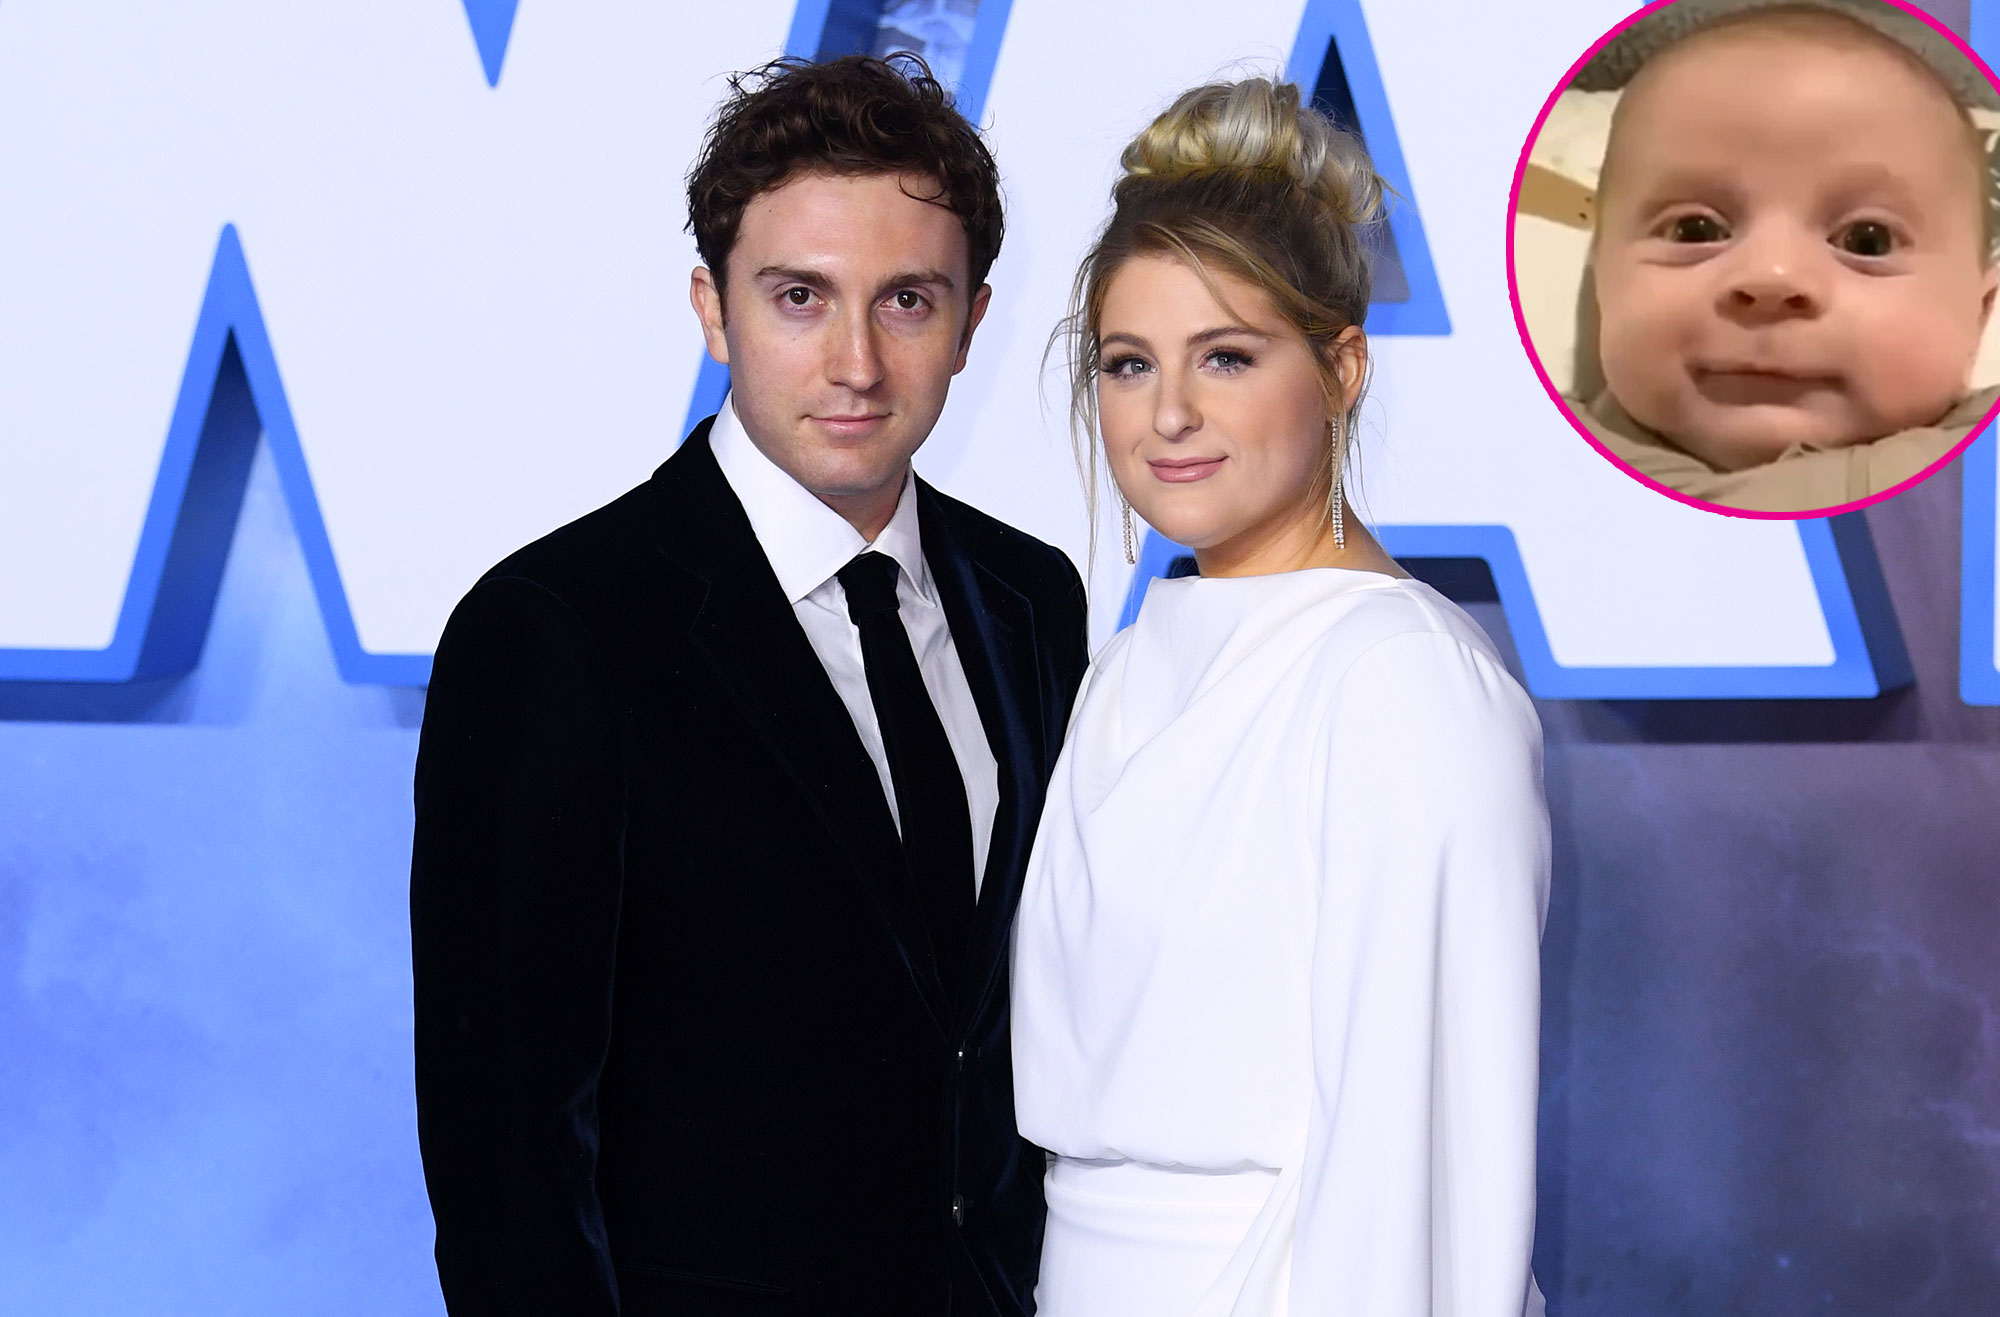 Meghan Trainor's Son Inspiring New Music And More Babies